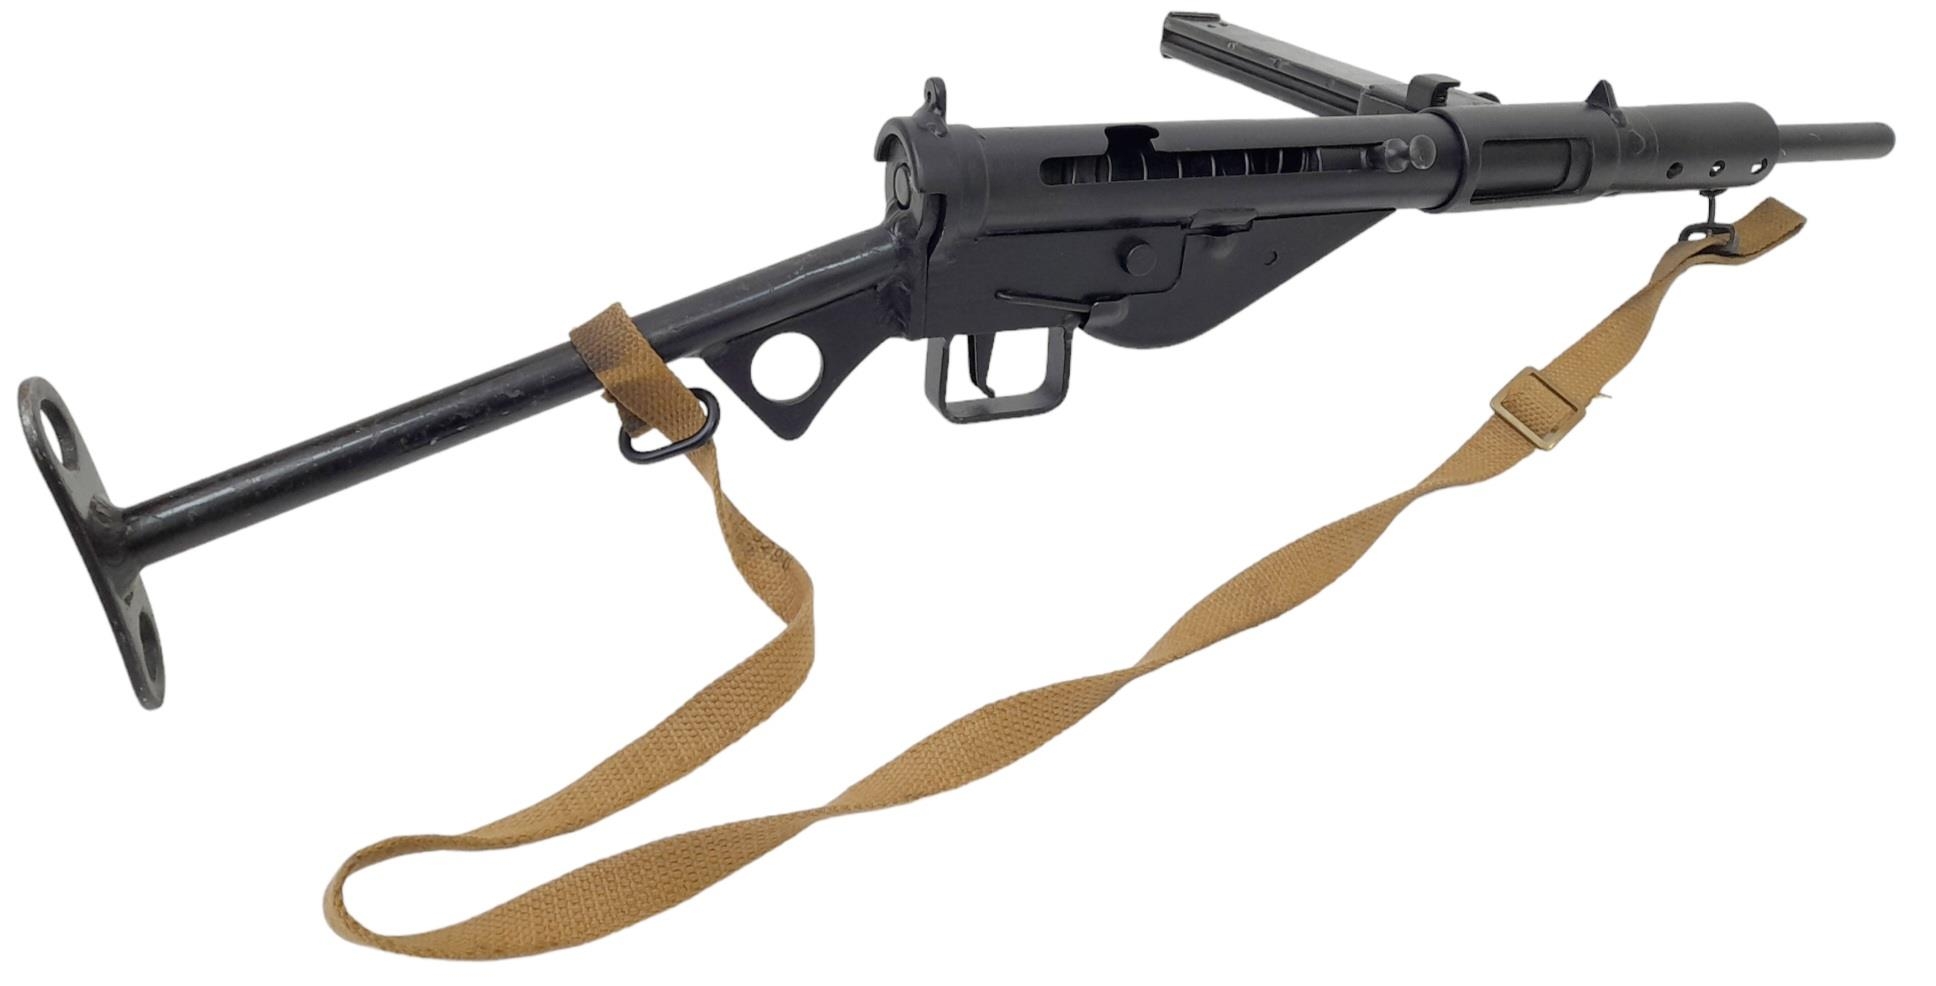 A Deactivated Maltby Sten Sub Machine Gun MKII. This British WW2 weapon was cheap and quick to - Image 2 of 5